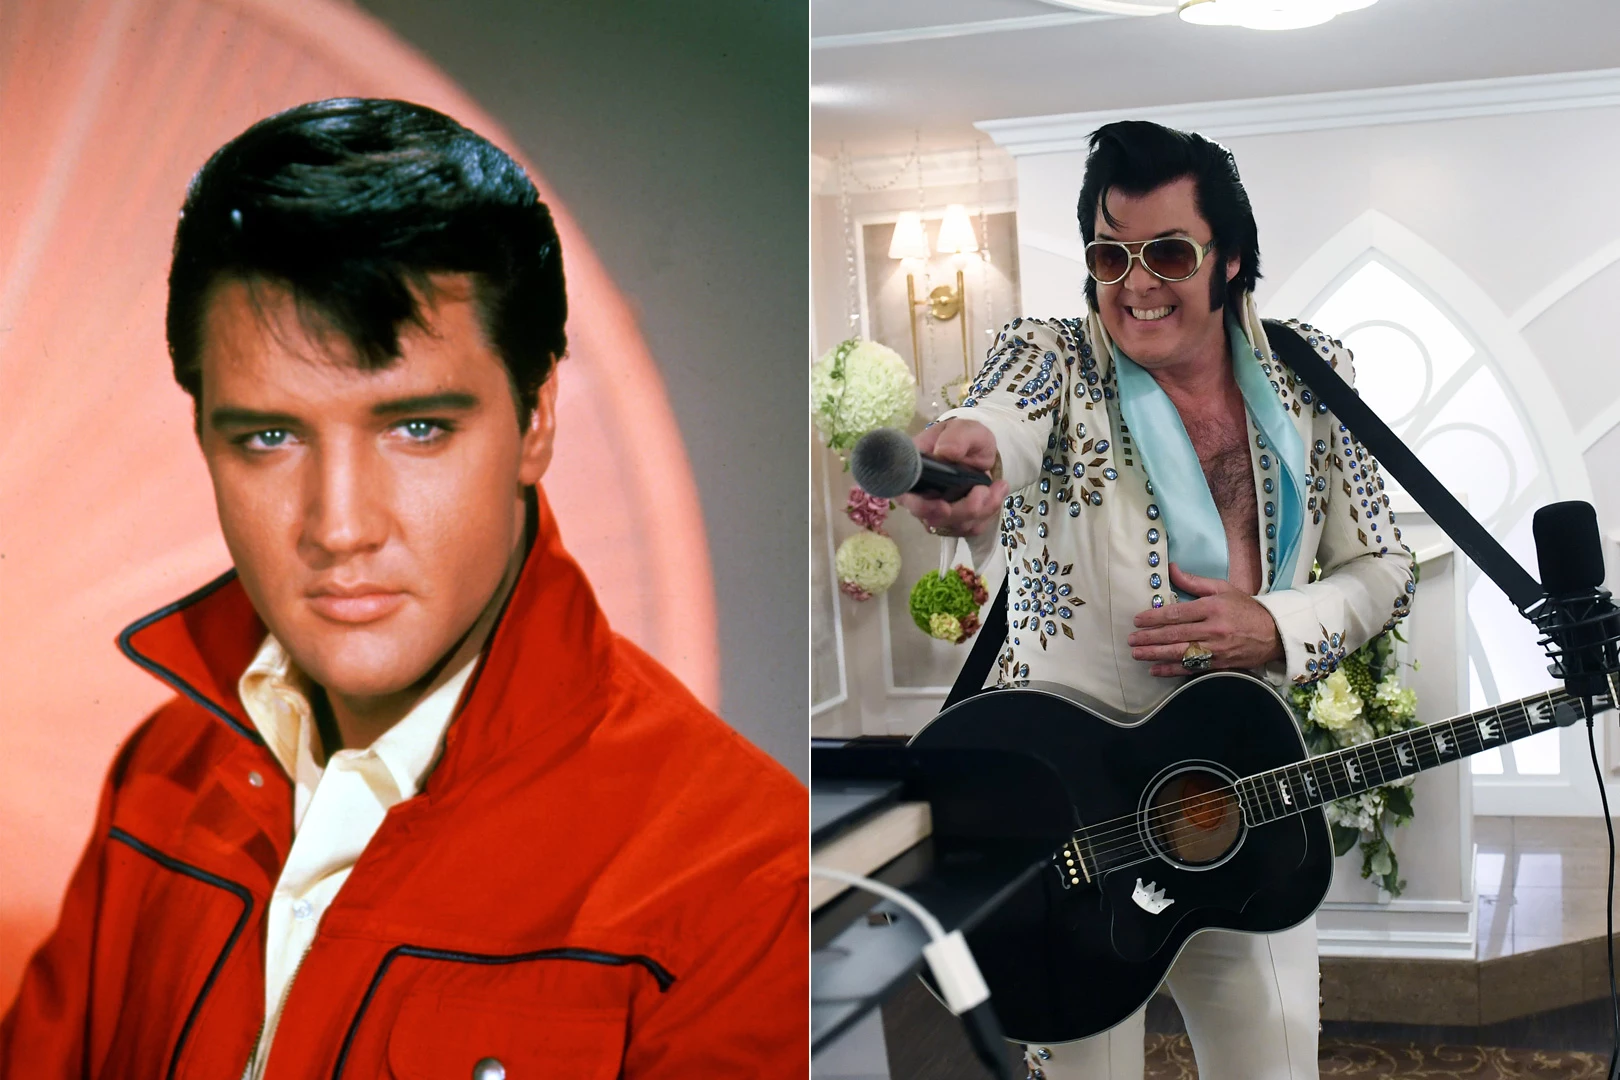 Las Vegas Chapels Legally Ordered to Stop Using Elvis Name